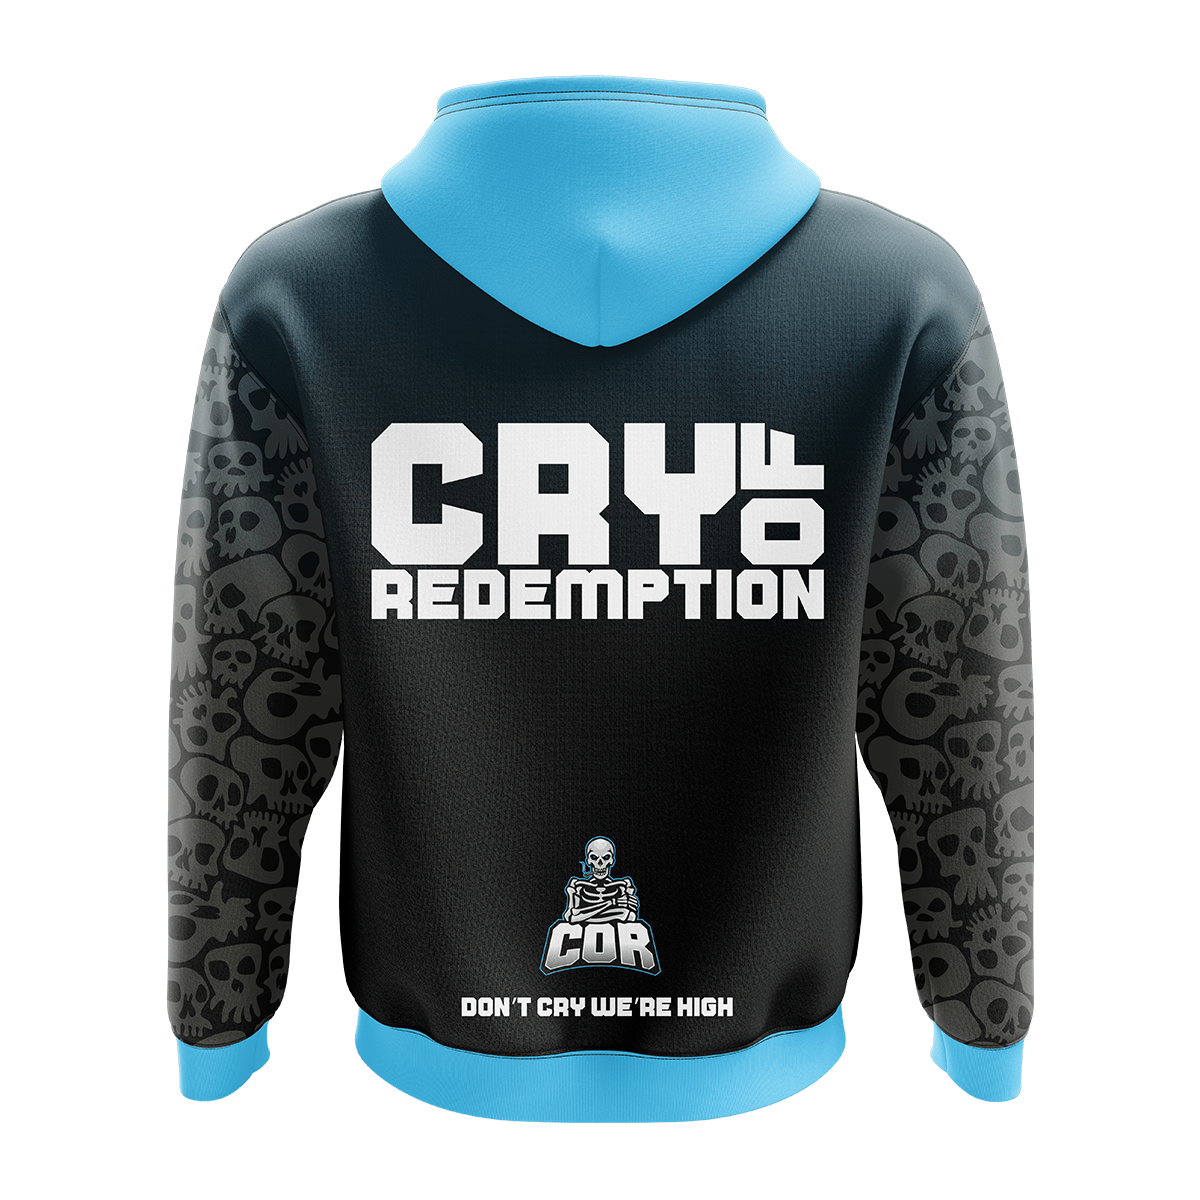 CRY OF REDEMPTION - Crew Zipper 2020 V2